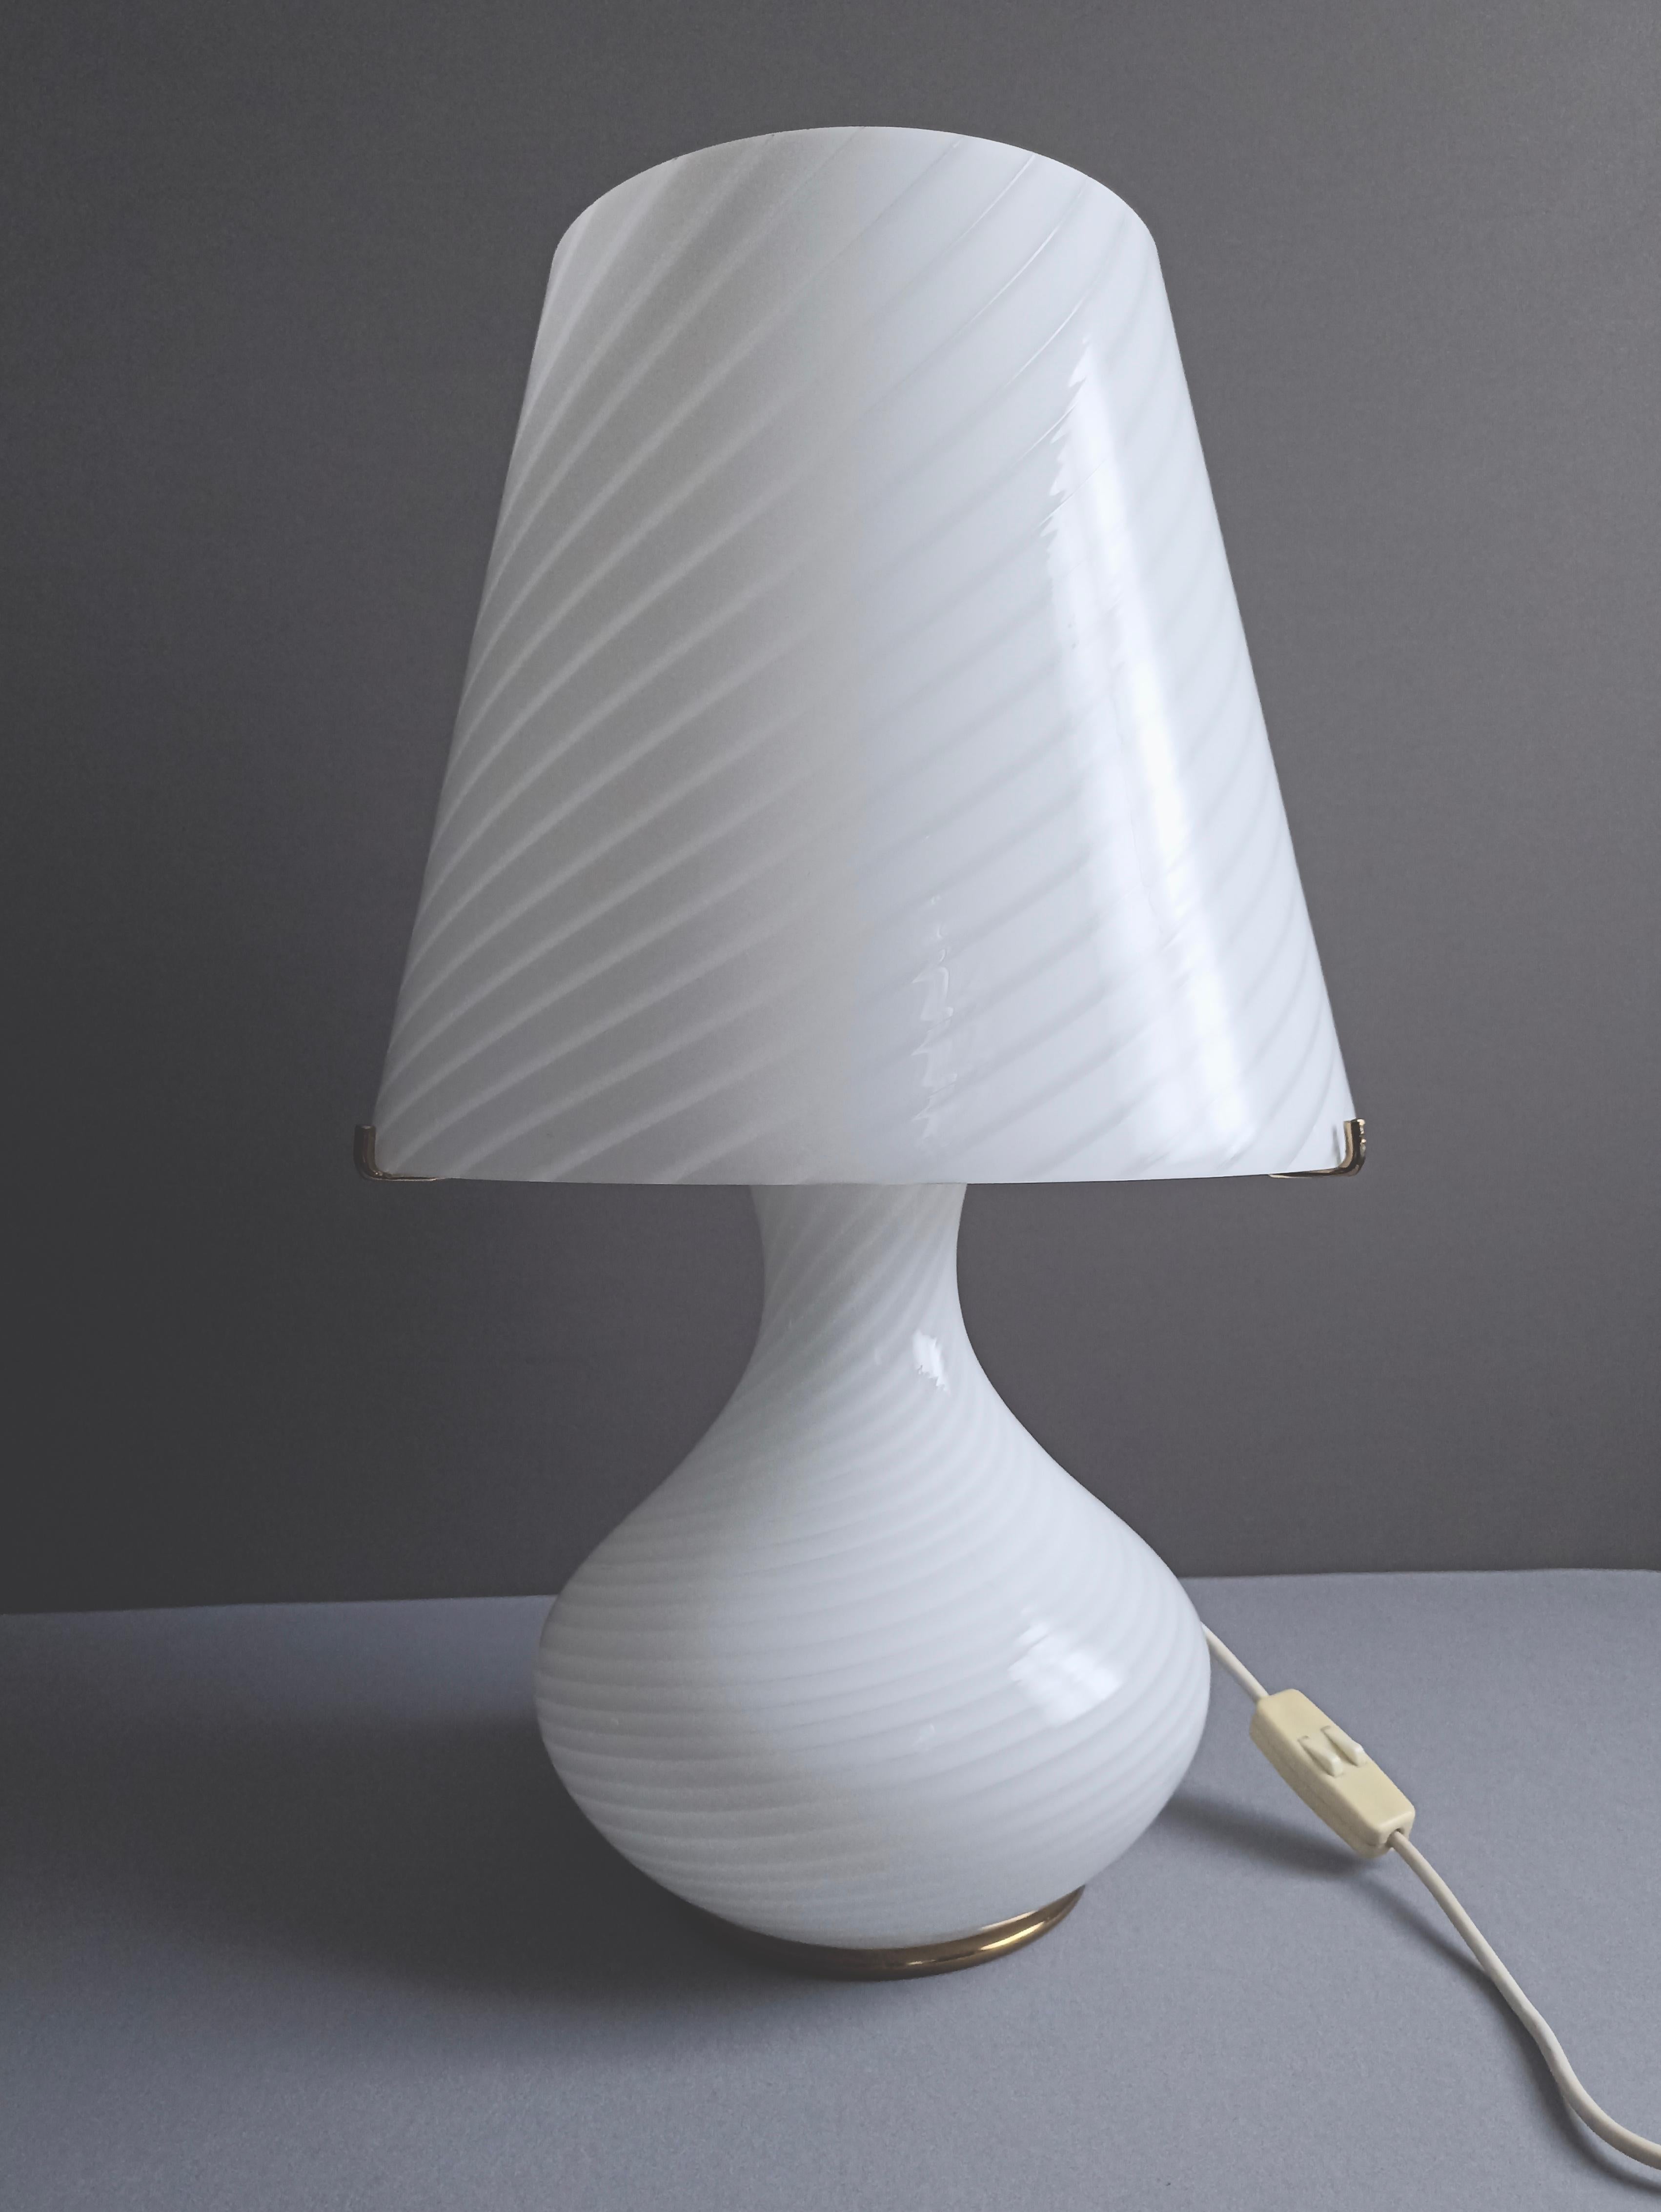 A fine Italian 1970s XL size swirled mushroom Murano glass table lamp, in very good condition.
This exceptional lamp consists of a conical shaped lampshade and a base, both made of glass, with a very elegant swirled pattern. The top lampshade rests